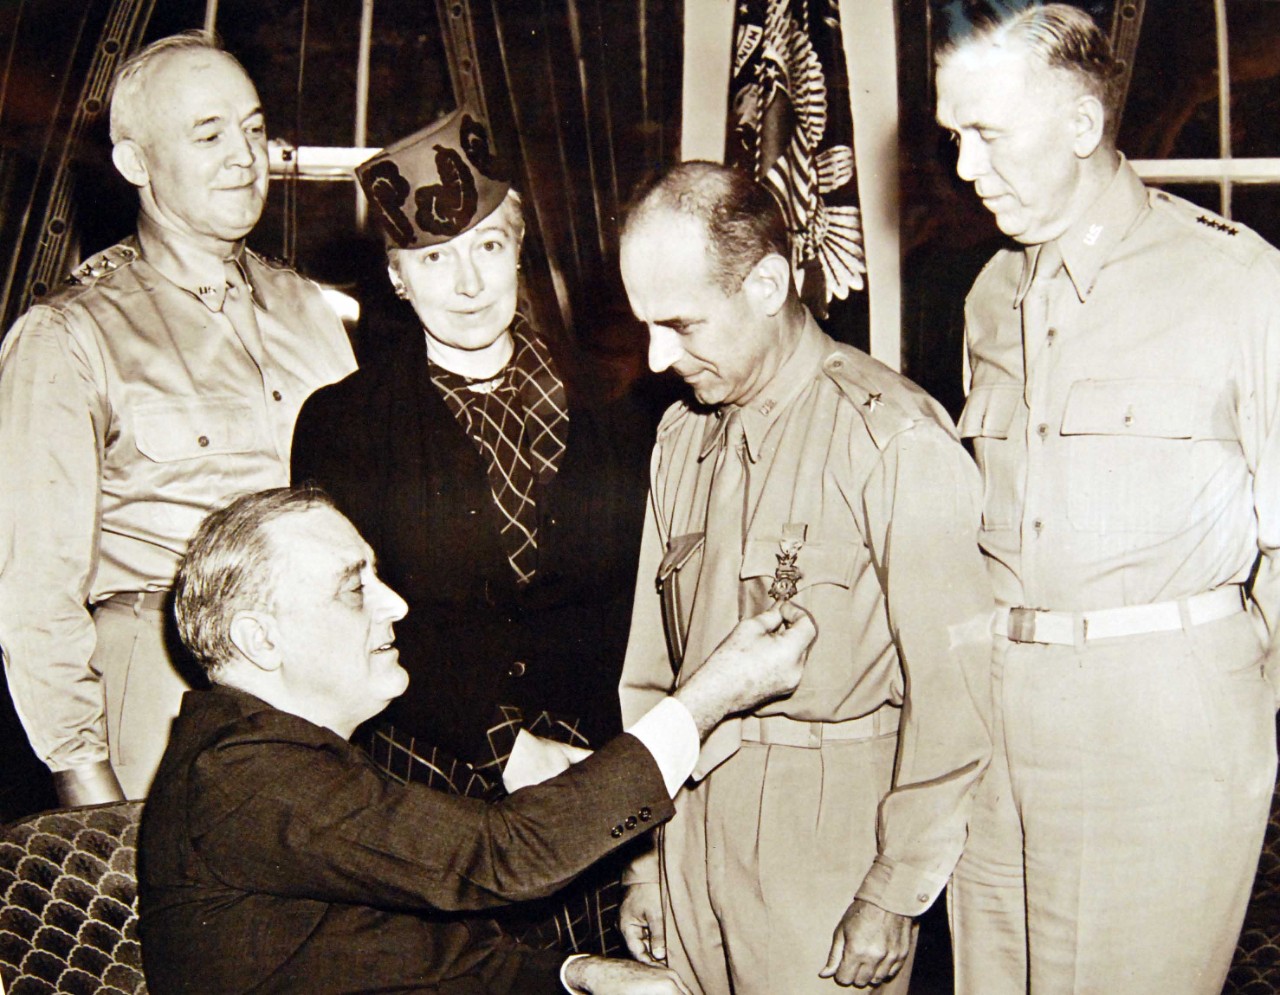 208-PU-52-LL-12: Doolittle Raid on Japan, April 18, 1942.   Brigadier General James H. Doolittle, famous speed flyer who won his wings in World War I, shown receiving the Medal of Honor from President Franklin D. Roosevelt for leading a squadron of Army bombers in a raid on Tokyo and other Japanese cities.  Looking on (left to right) are Lieutenant General H.H. Arnold, Chief of Army Air Forces, Mrs. Doolittle, and then Chief of Staff, General George C. Marshall.  Office of War Information Photograph, now in the collections of the National Archives.  (2017/05/02).